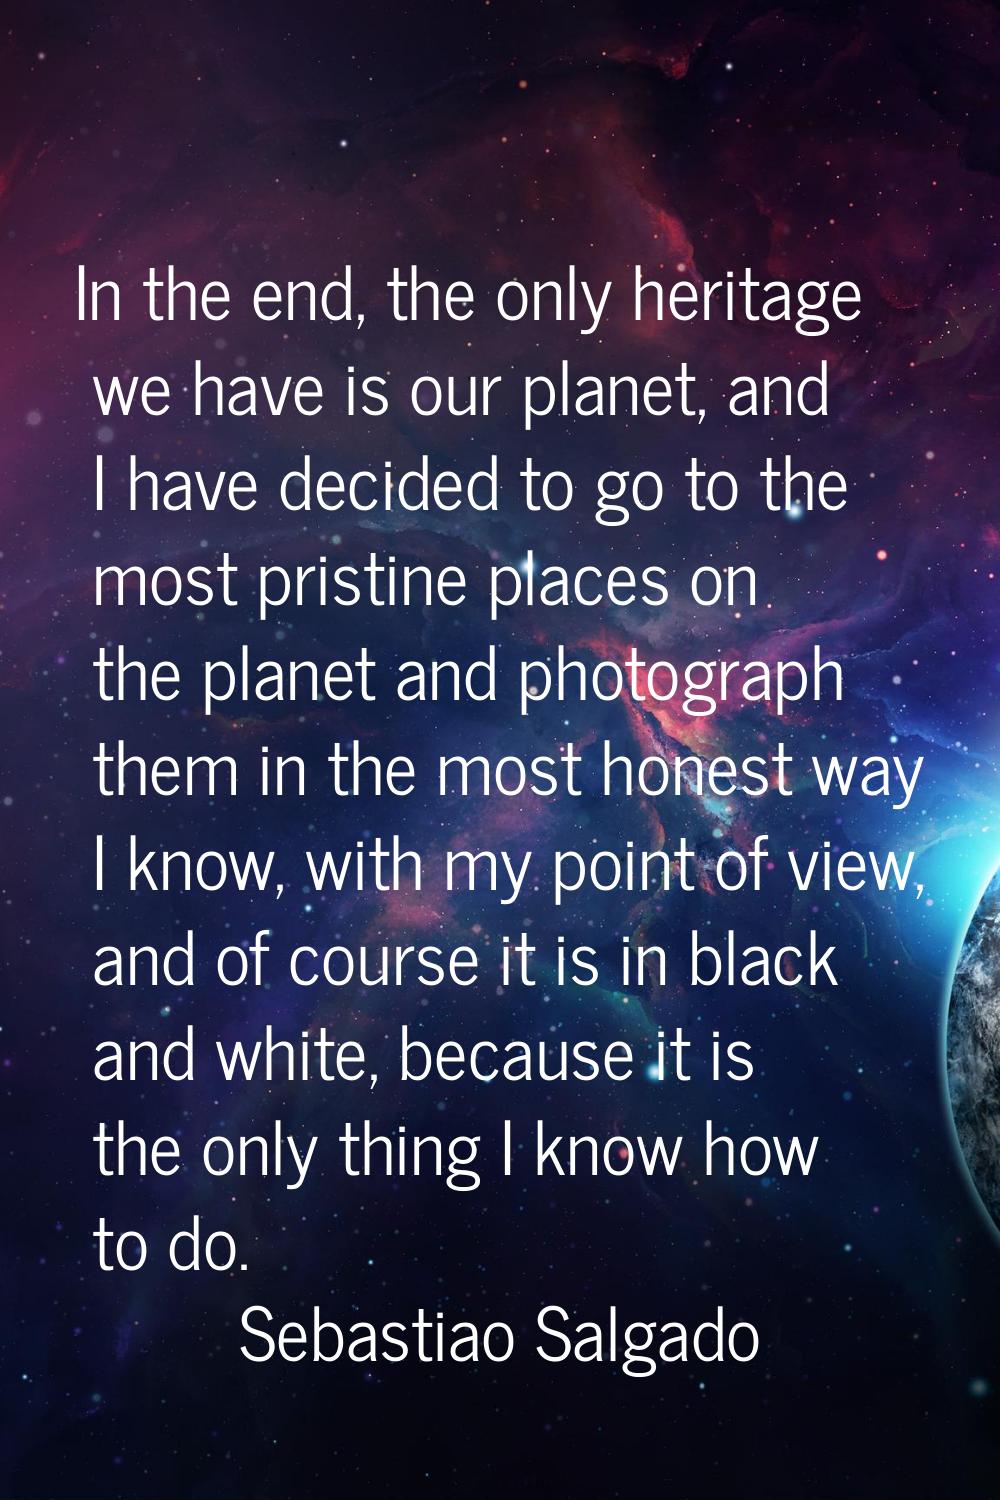 In the end, the only heritage we have is our planet, and I have decided to go to the most pristine 